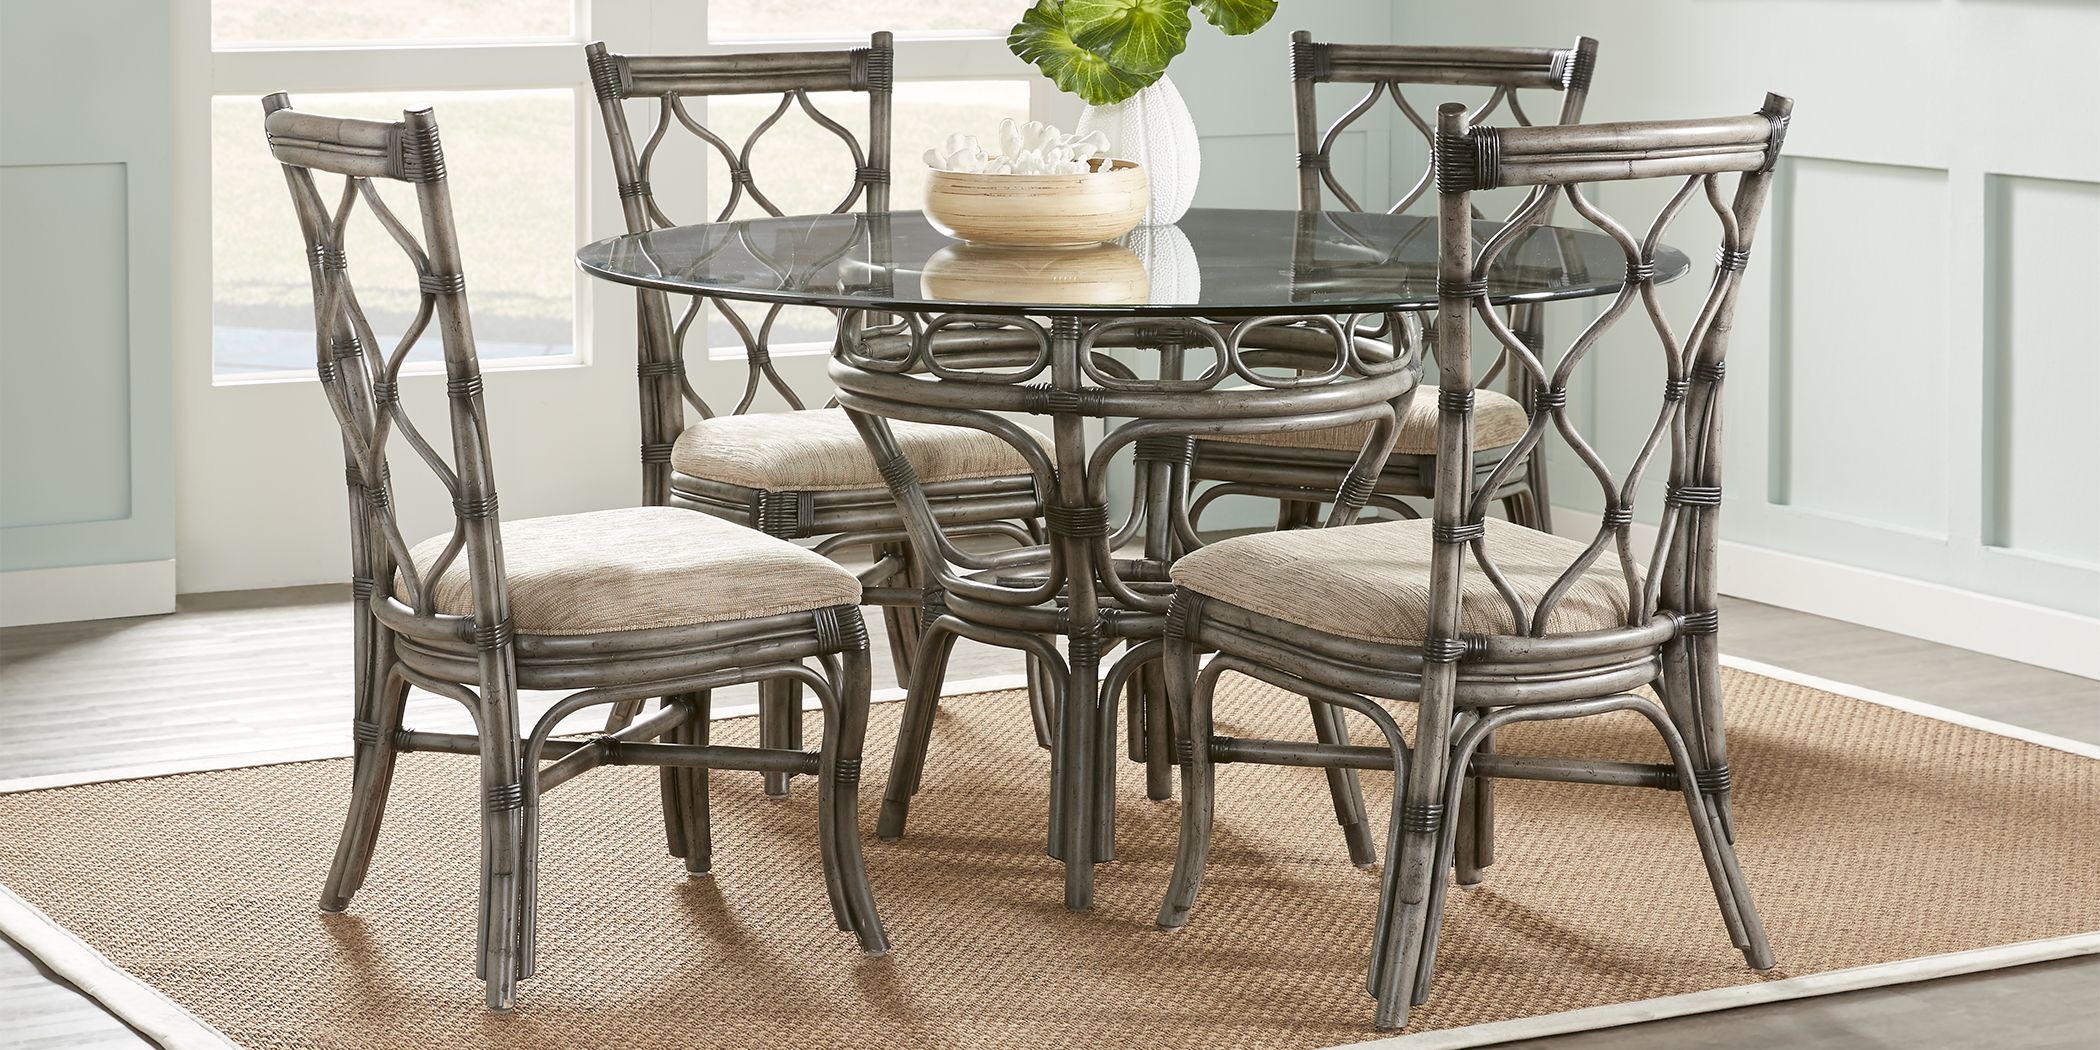 Rooms To Go Glass Dining Room Sets